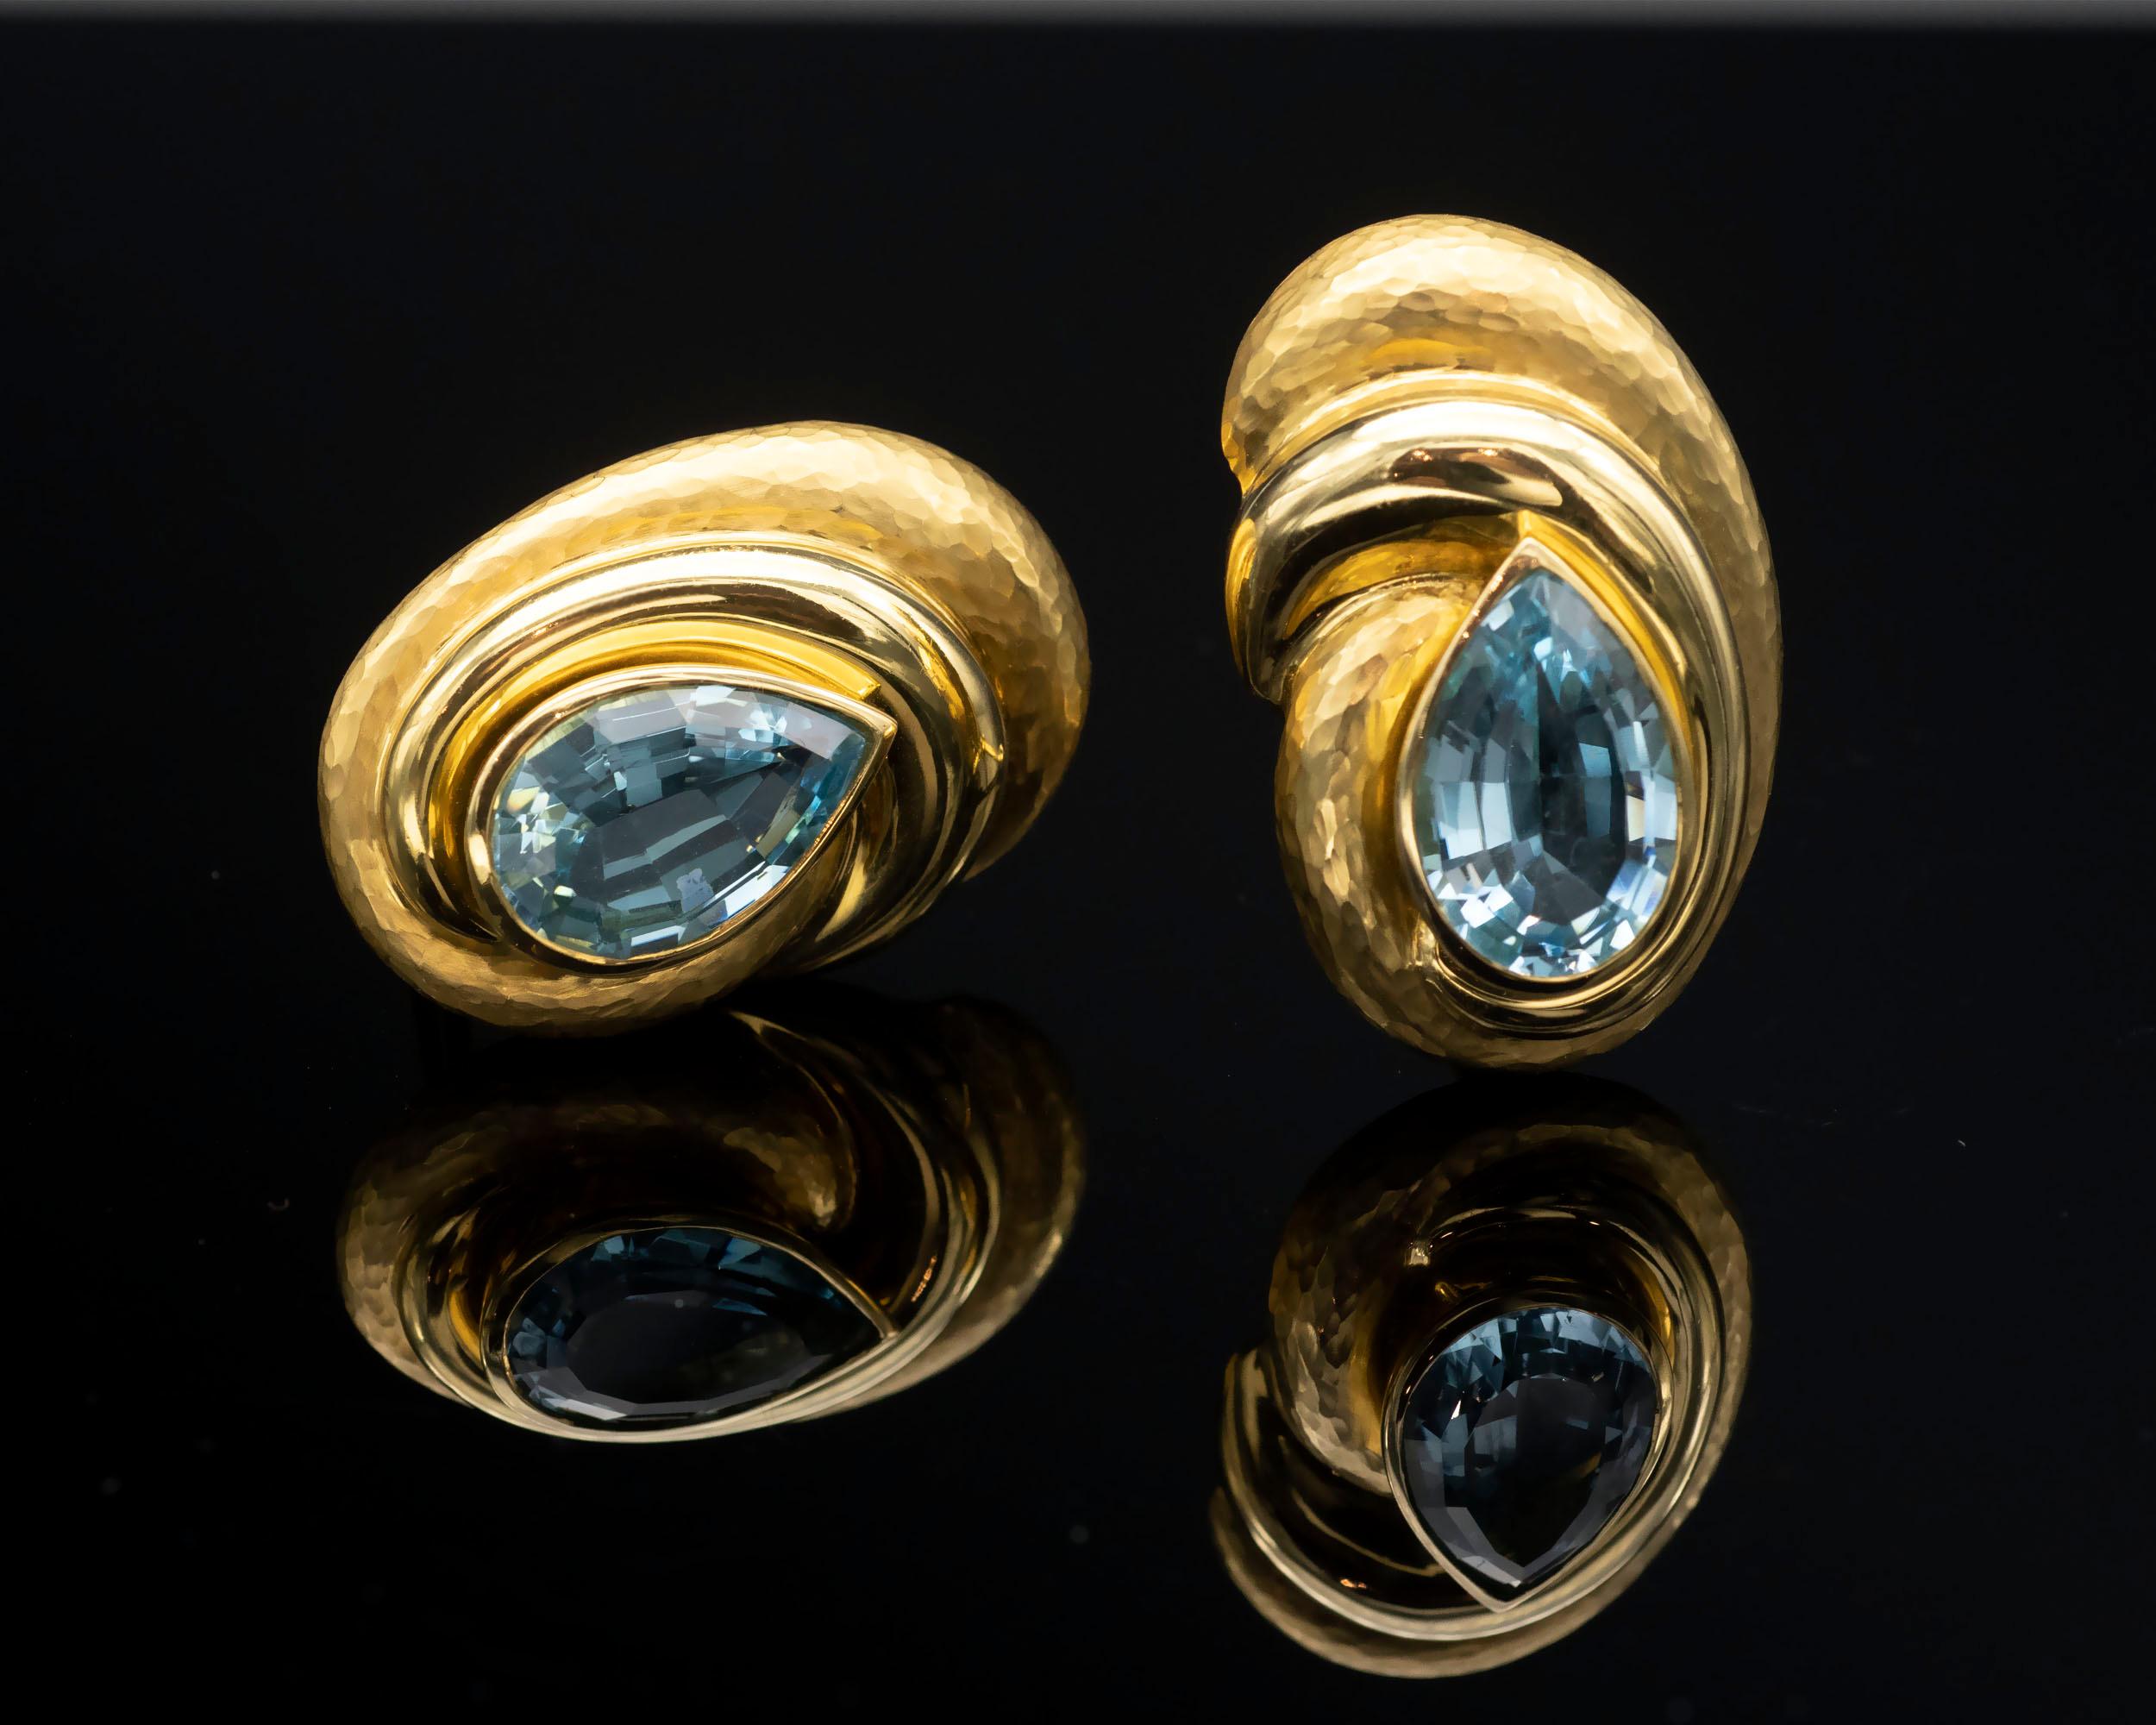 Delightful earrings: A swirl of hammered and polished solid 18-karat gold showcasing a pear shape blue topaz.  These topaz have a really beautiful color and look like nice aquamarines (not the oversaturated blue). The make is excellent.
Weight: 26.7